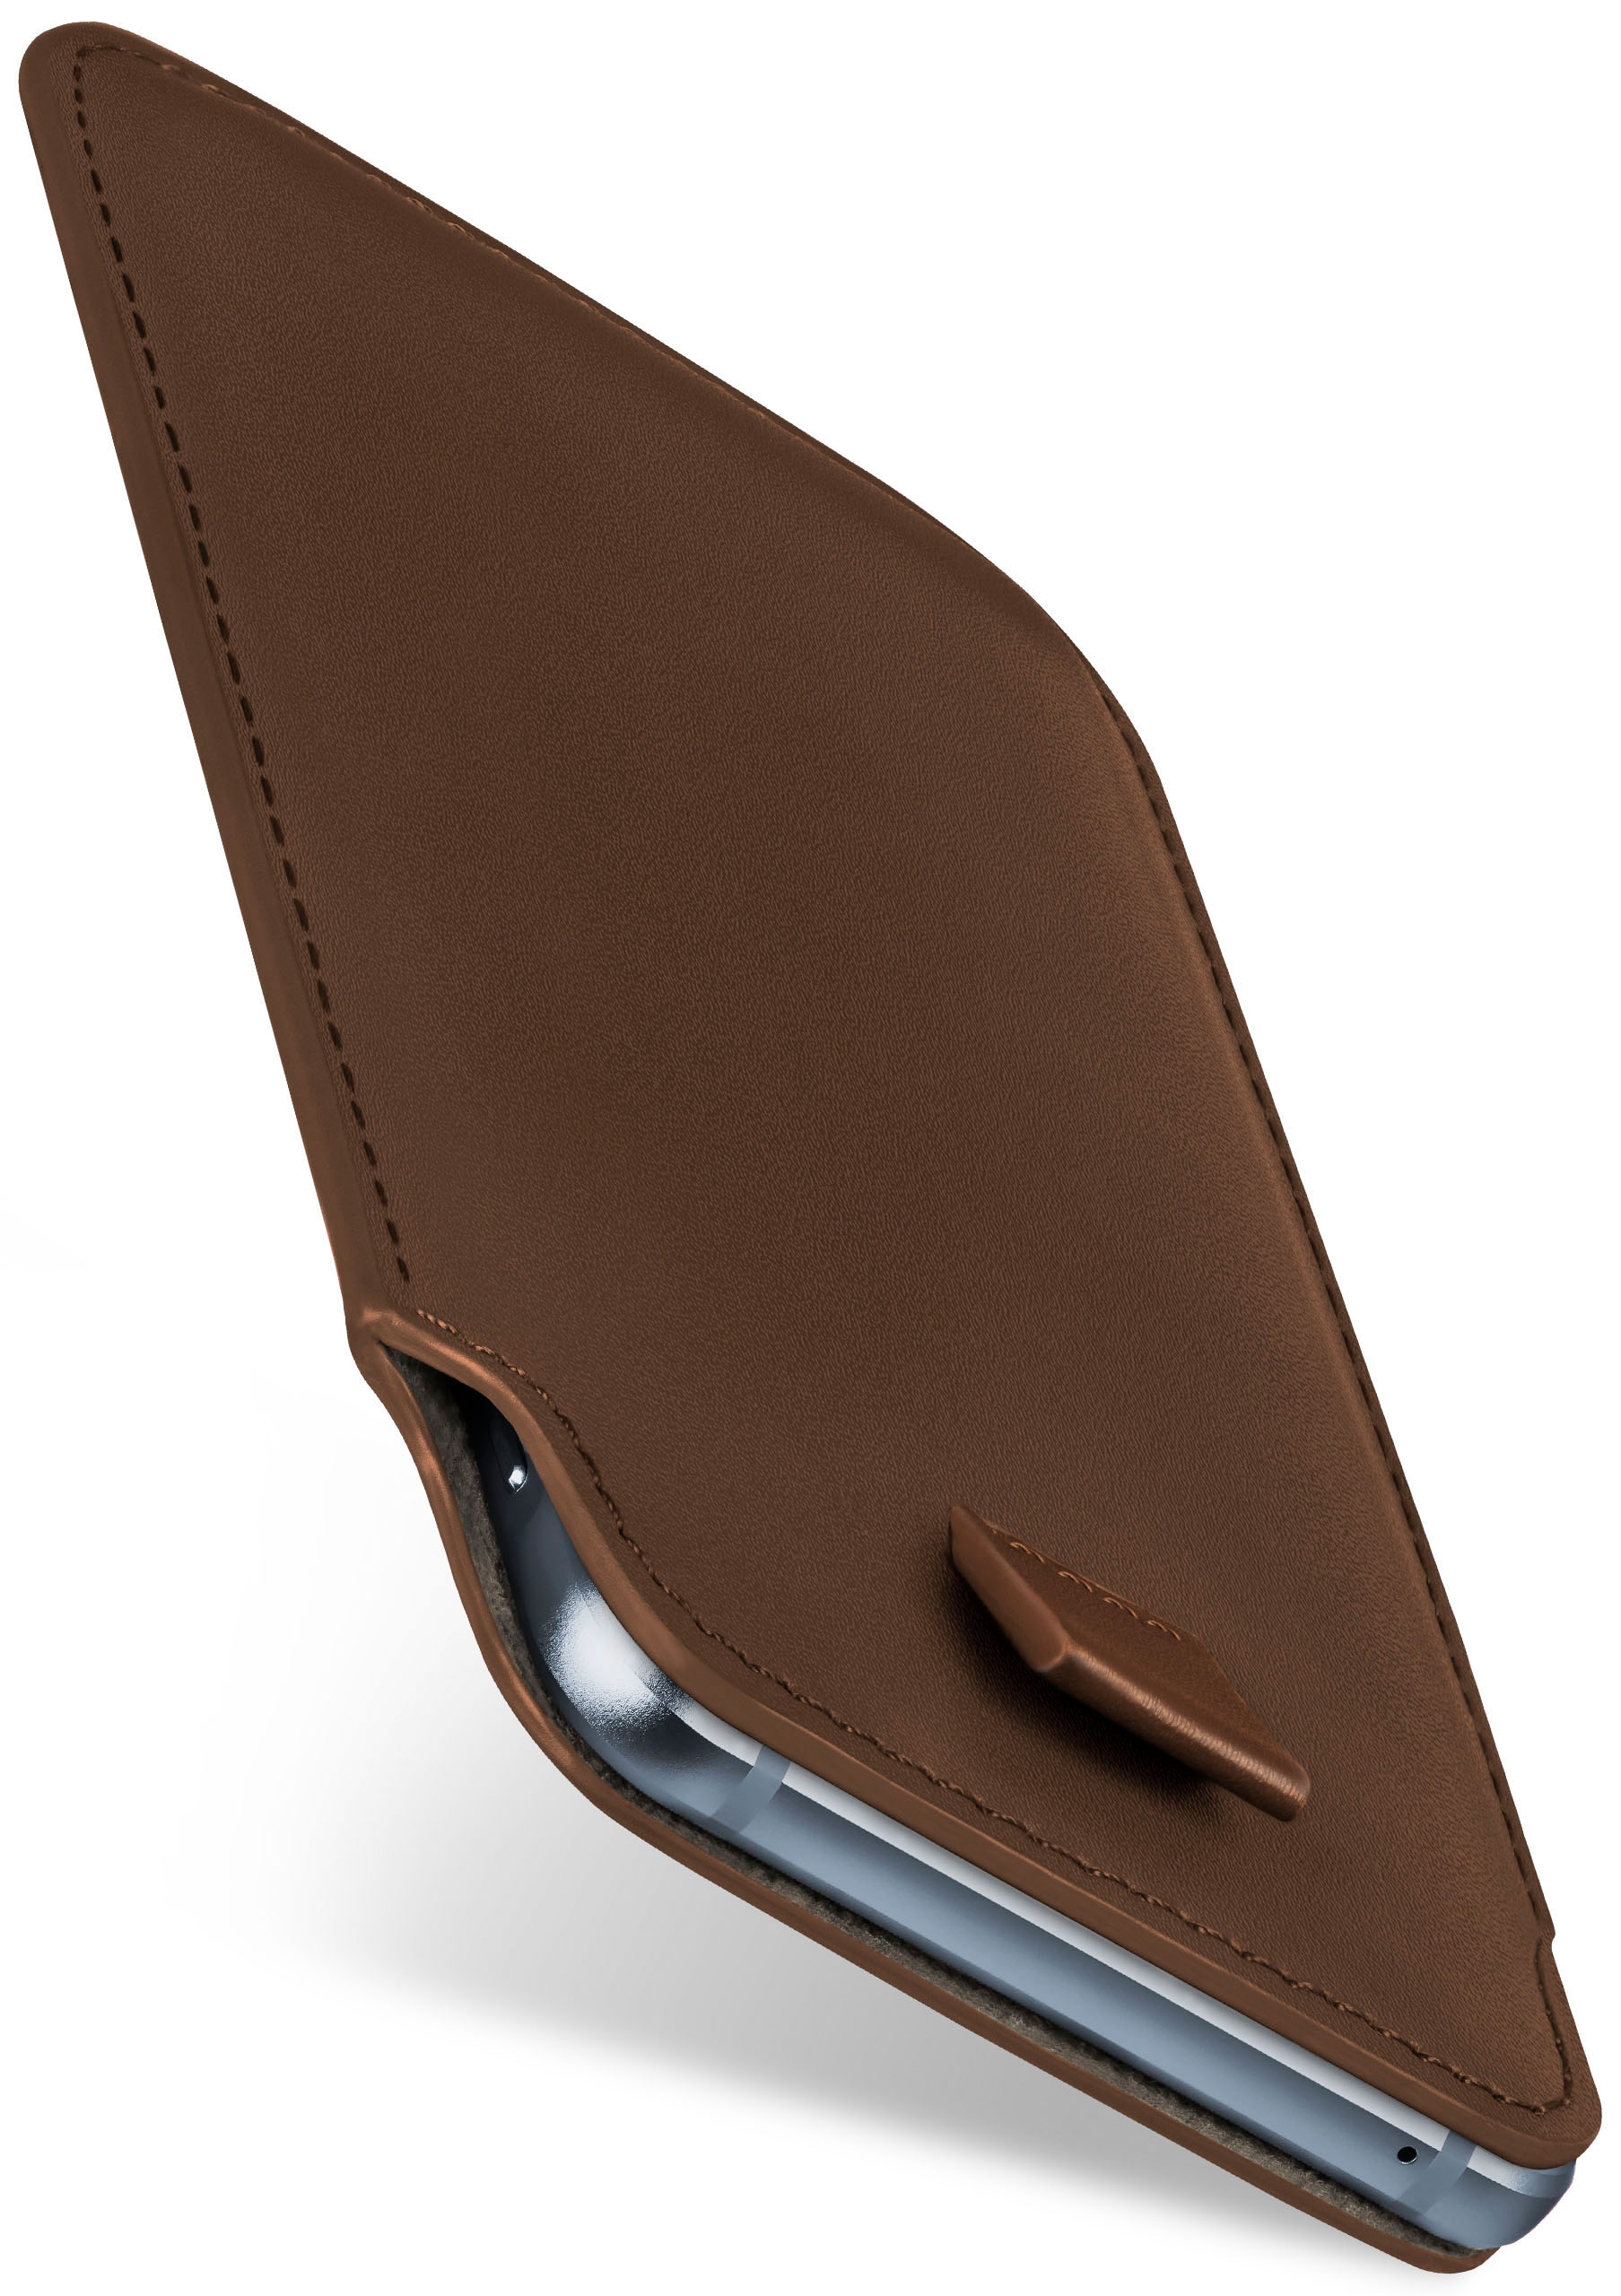 MOEX Slide Case, Full Oxide-Brown 8 Cover, Nokia, Sirocco